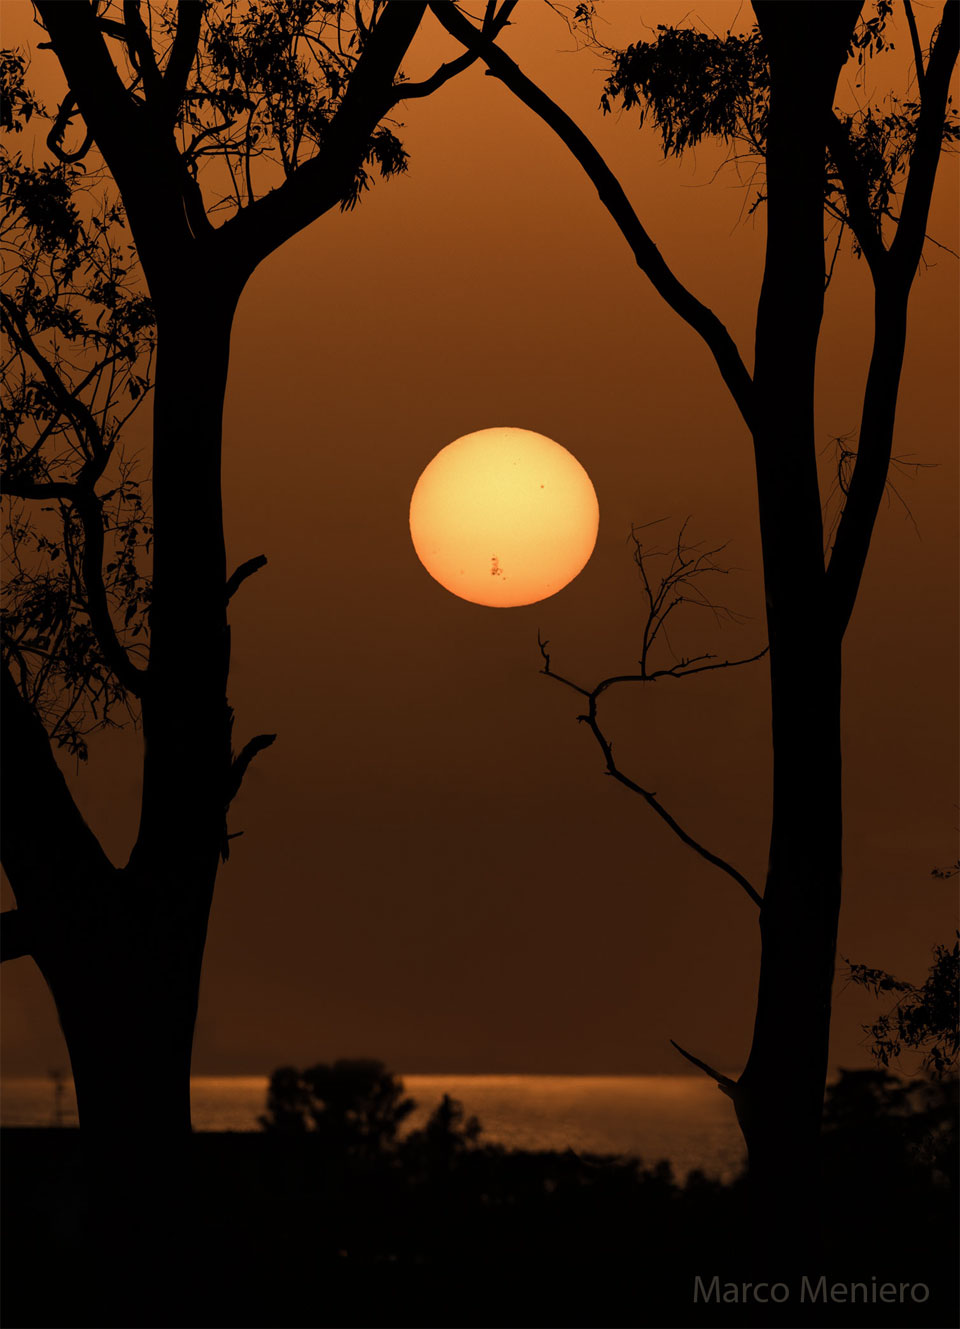 A distant Sun is seen over water and between foreground
trees. On the lower part of the Sun is the gigantic
active region AR 3664 visible by its dark sunspots.
Please see the explanation for more detailed information.